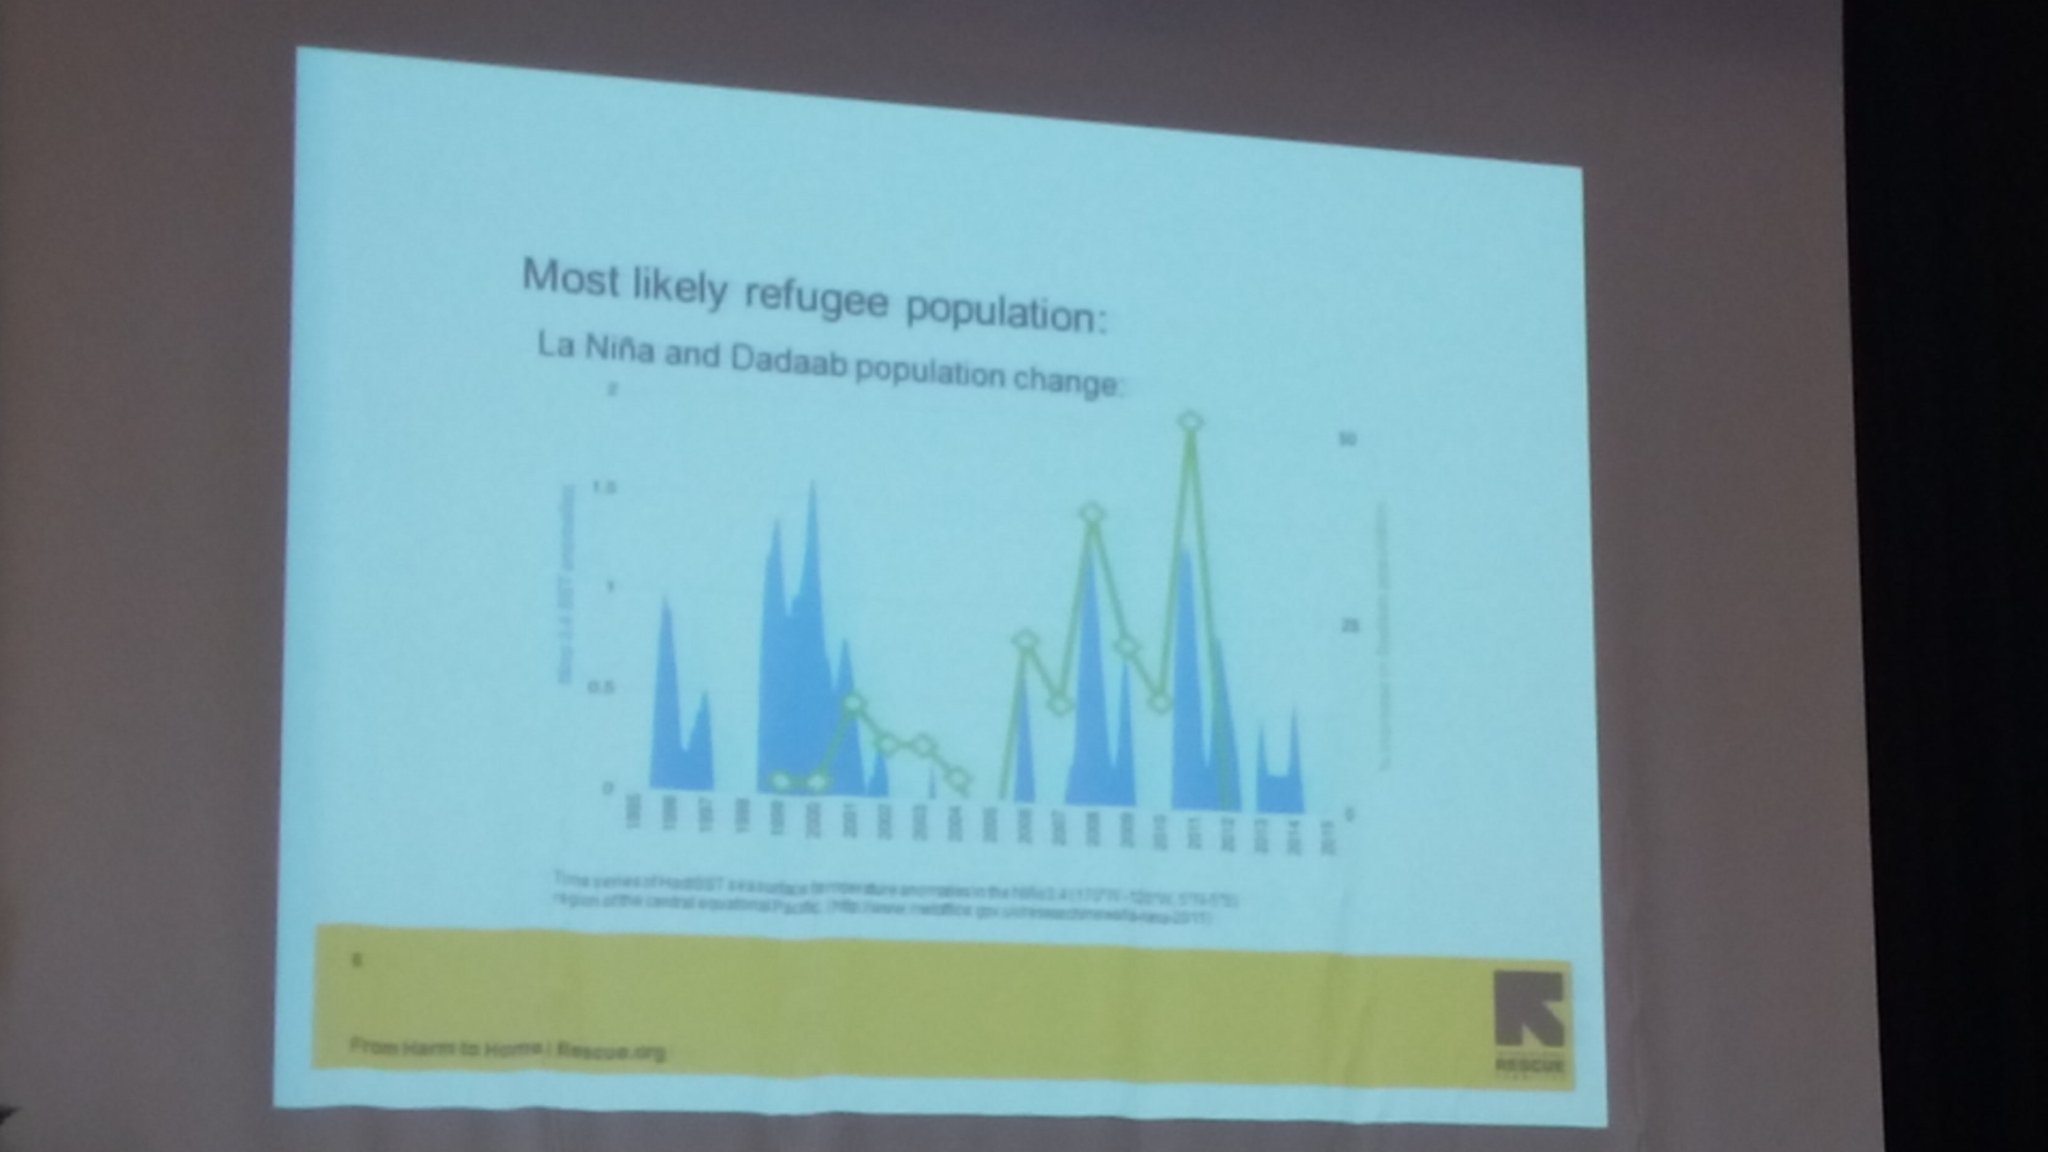 Interesting graph by @theIRC showing relation between #migration & #LaNina: patterns of #somali #refugee increase in #dabaab, Kenya.#DCdays https://t.co/PRziZs2QFi